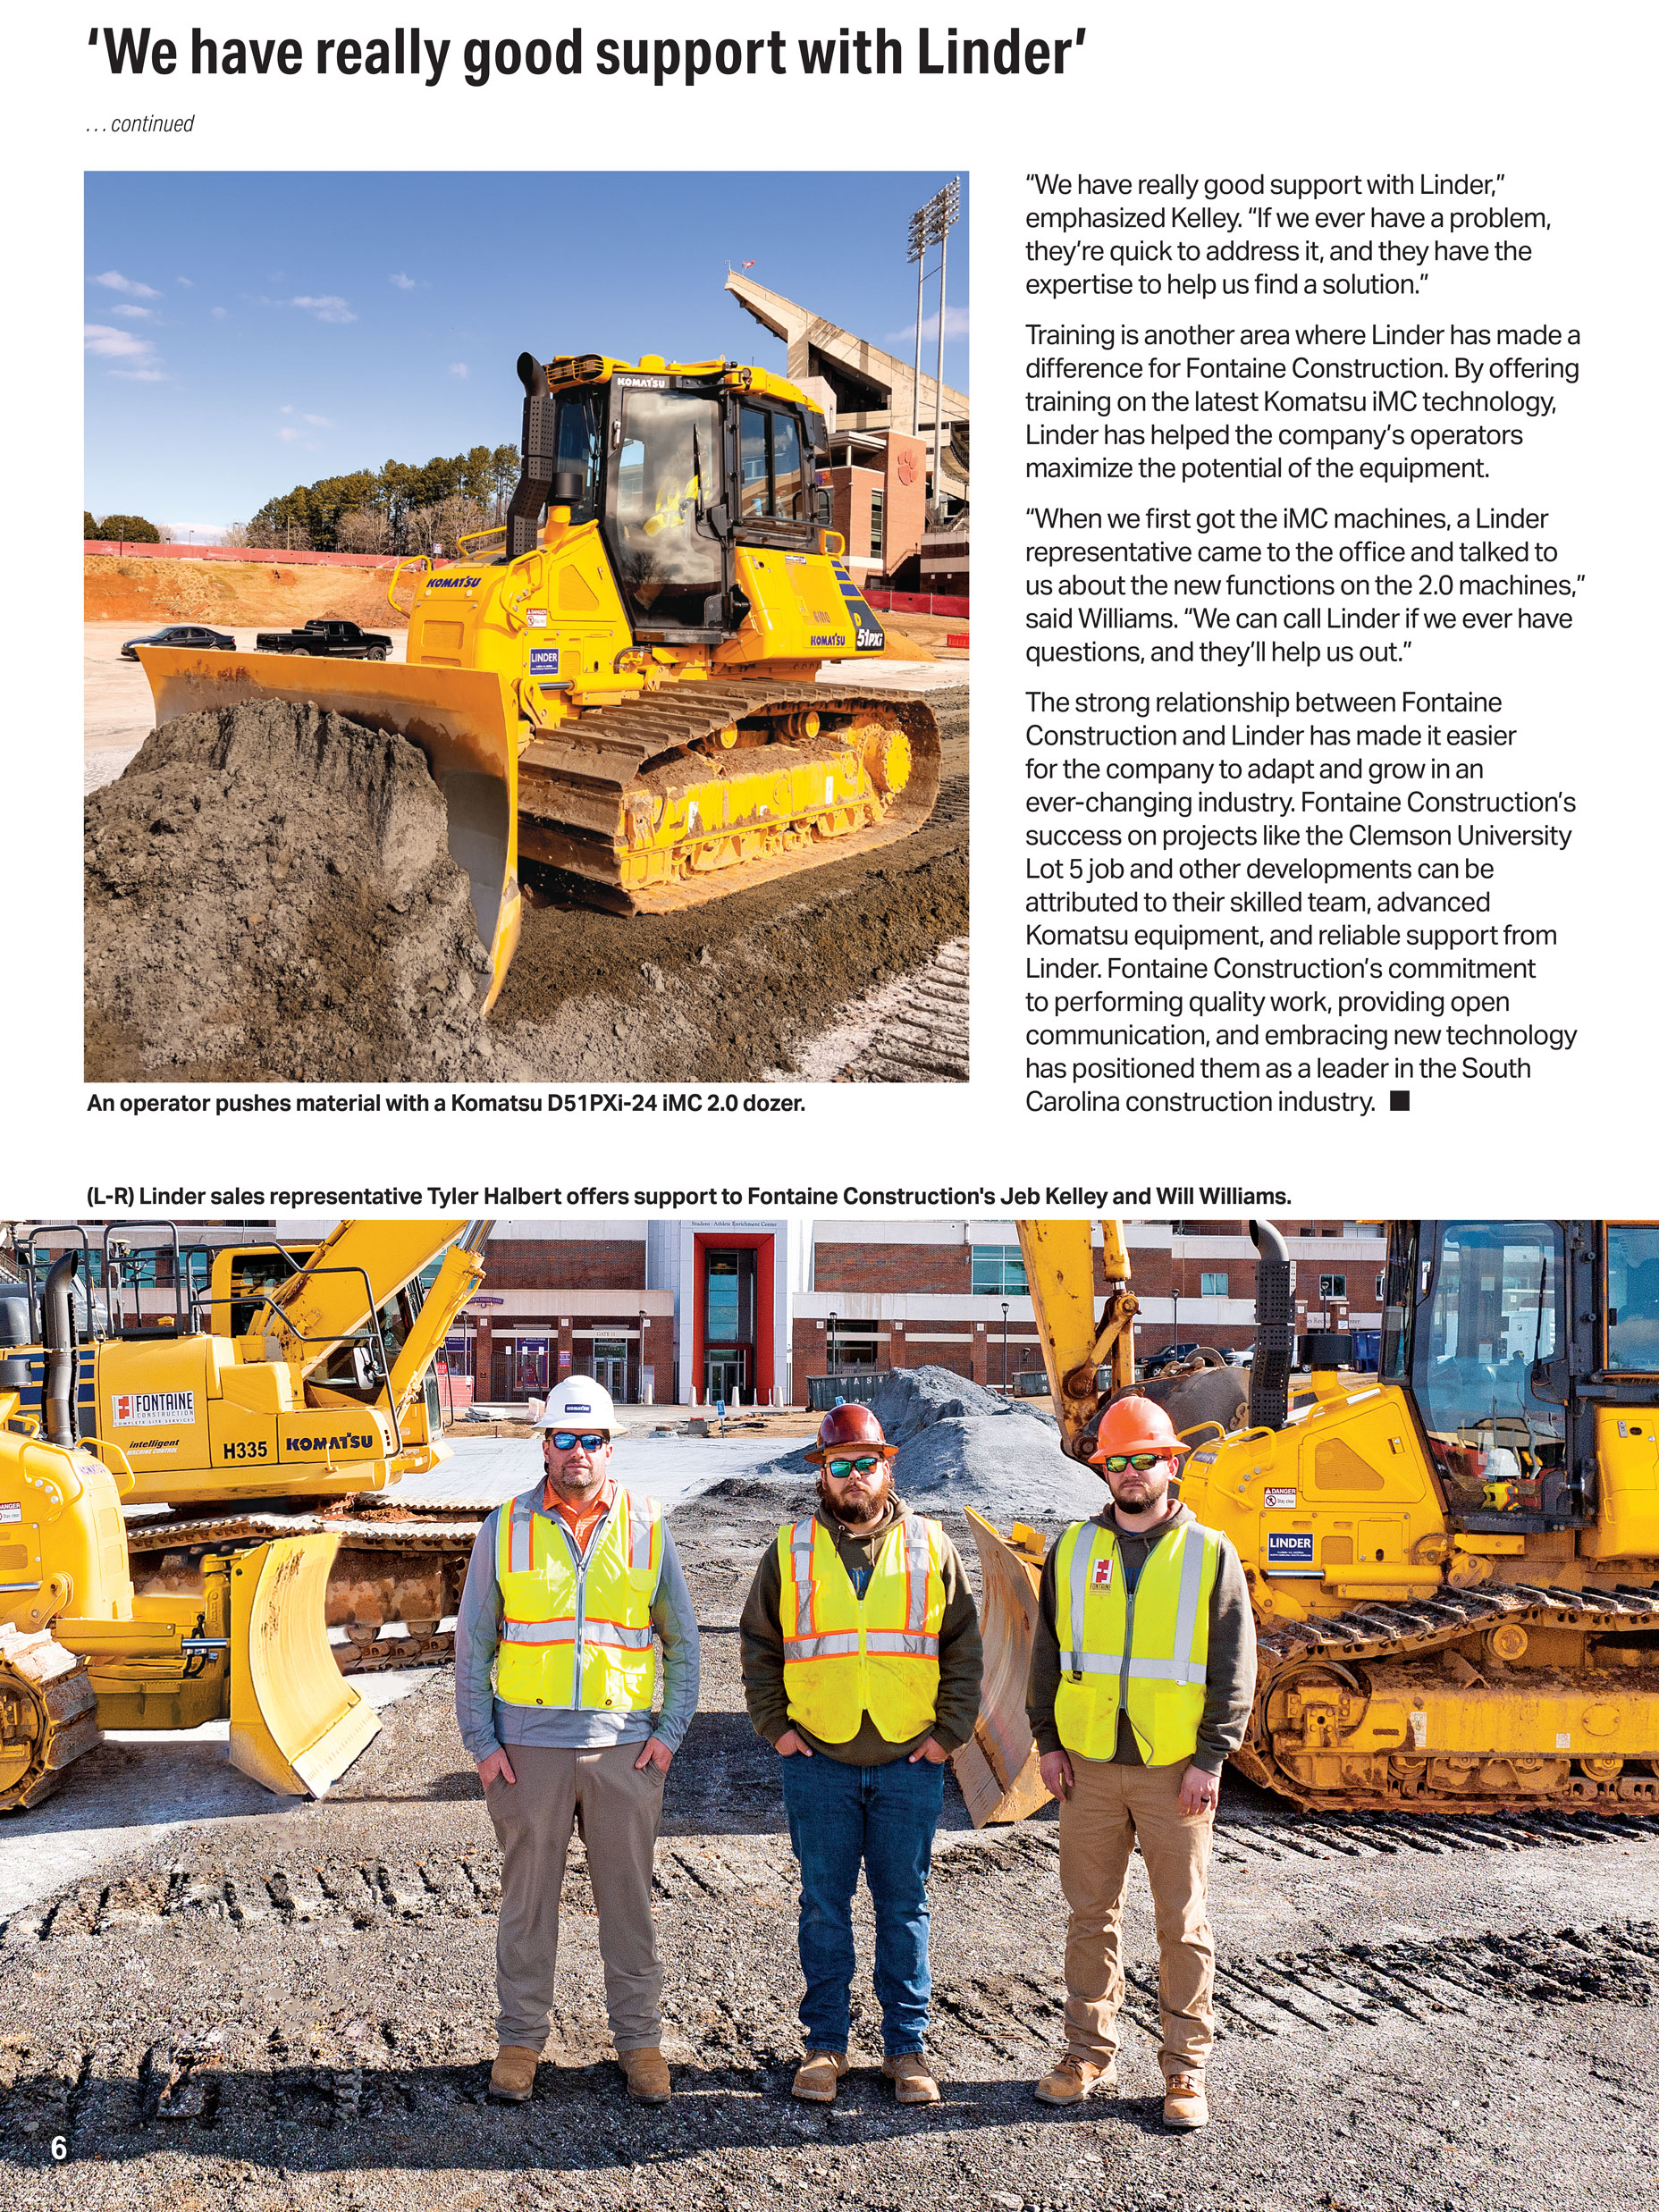 Page 3 of a magazine spread showcasing Fontaine Construction